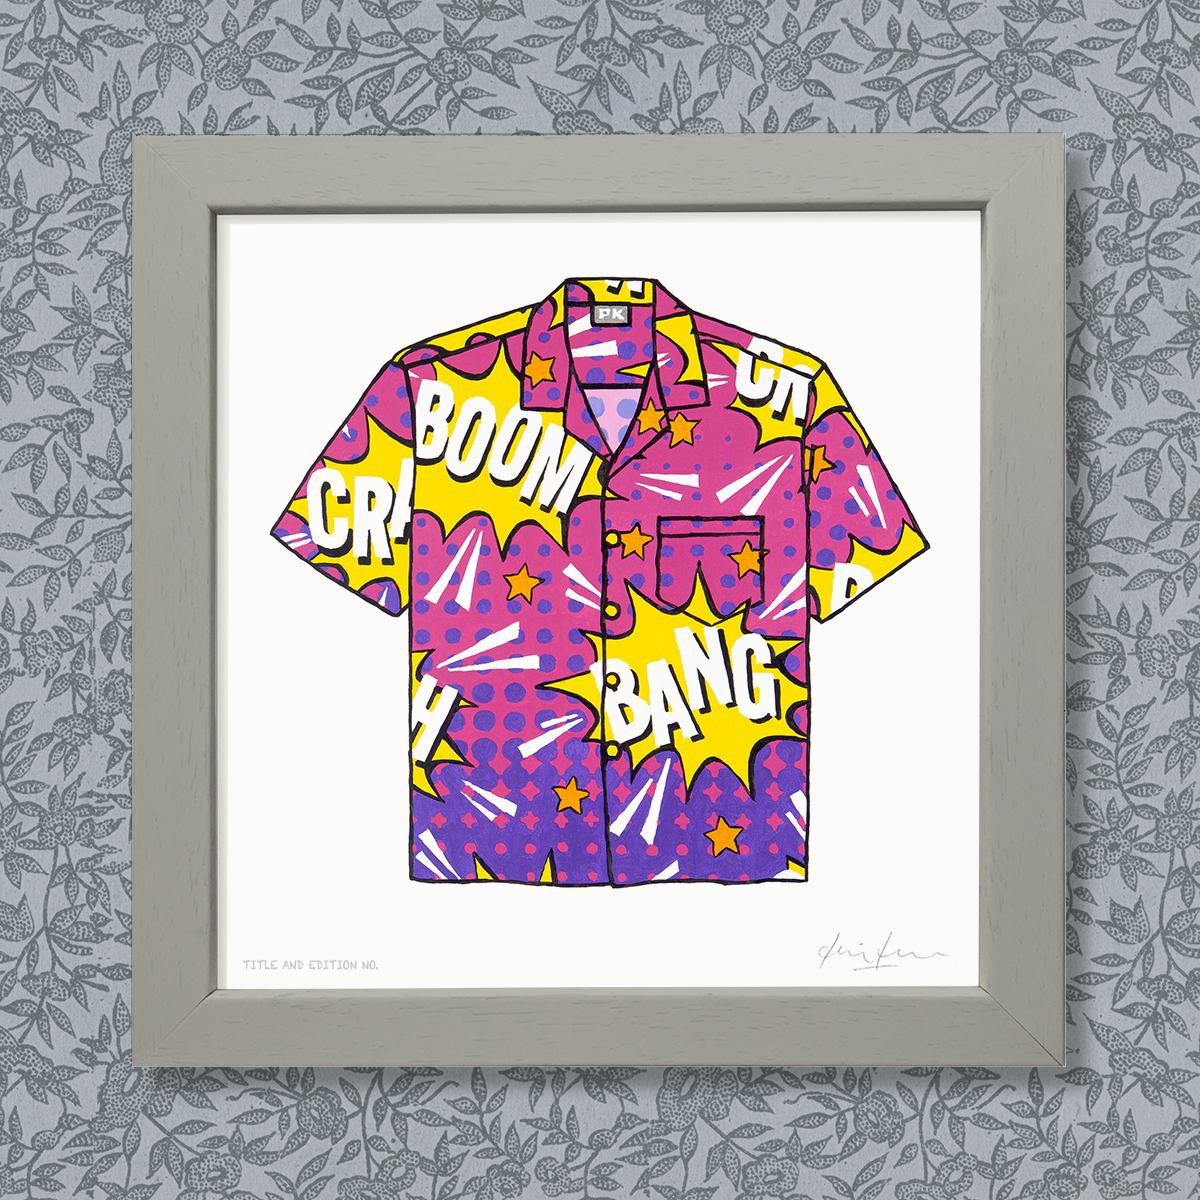 Limited edition print - Loud 'Tea' Shirt - in grey frame